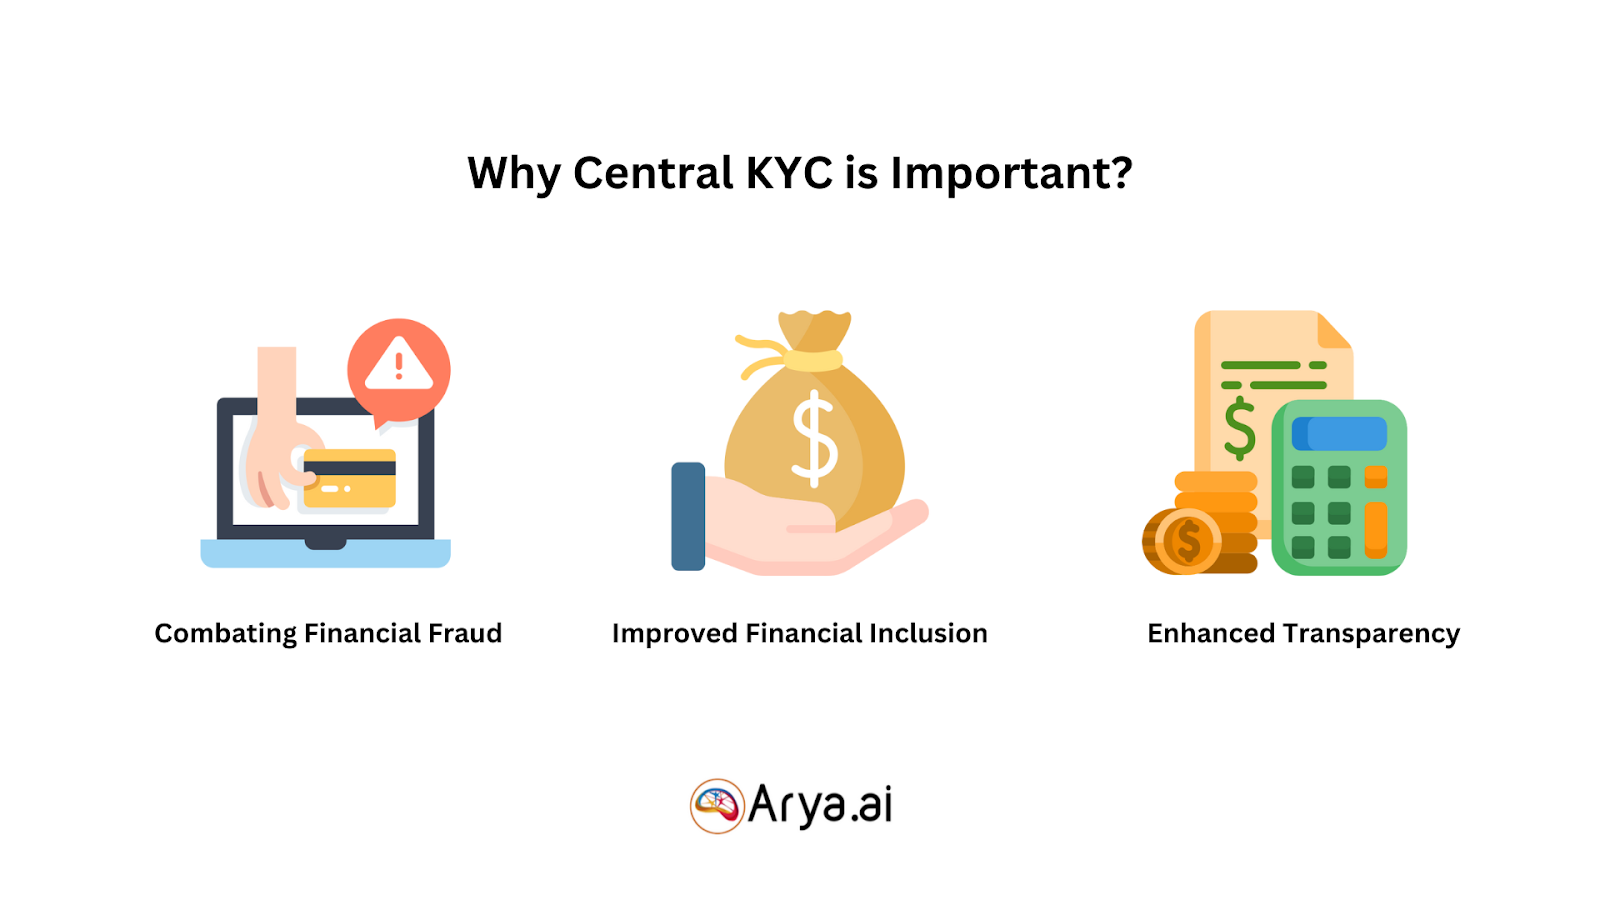 Everything you need to know about CKYC - Features, Benefits and How it Works